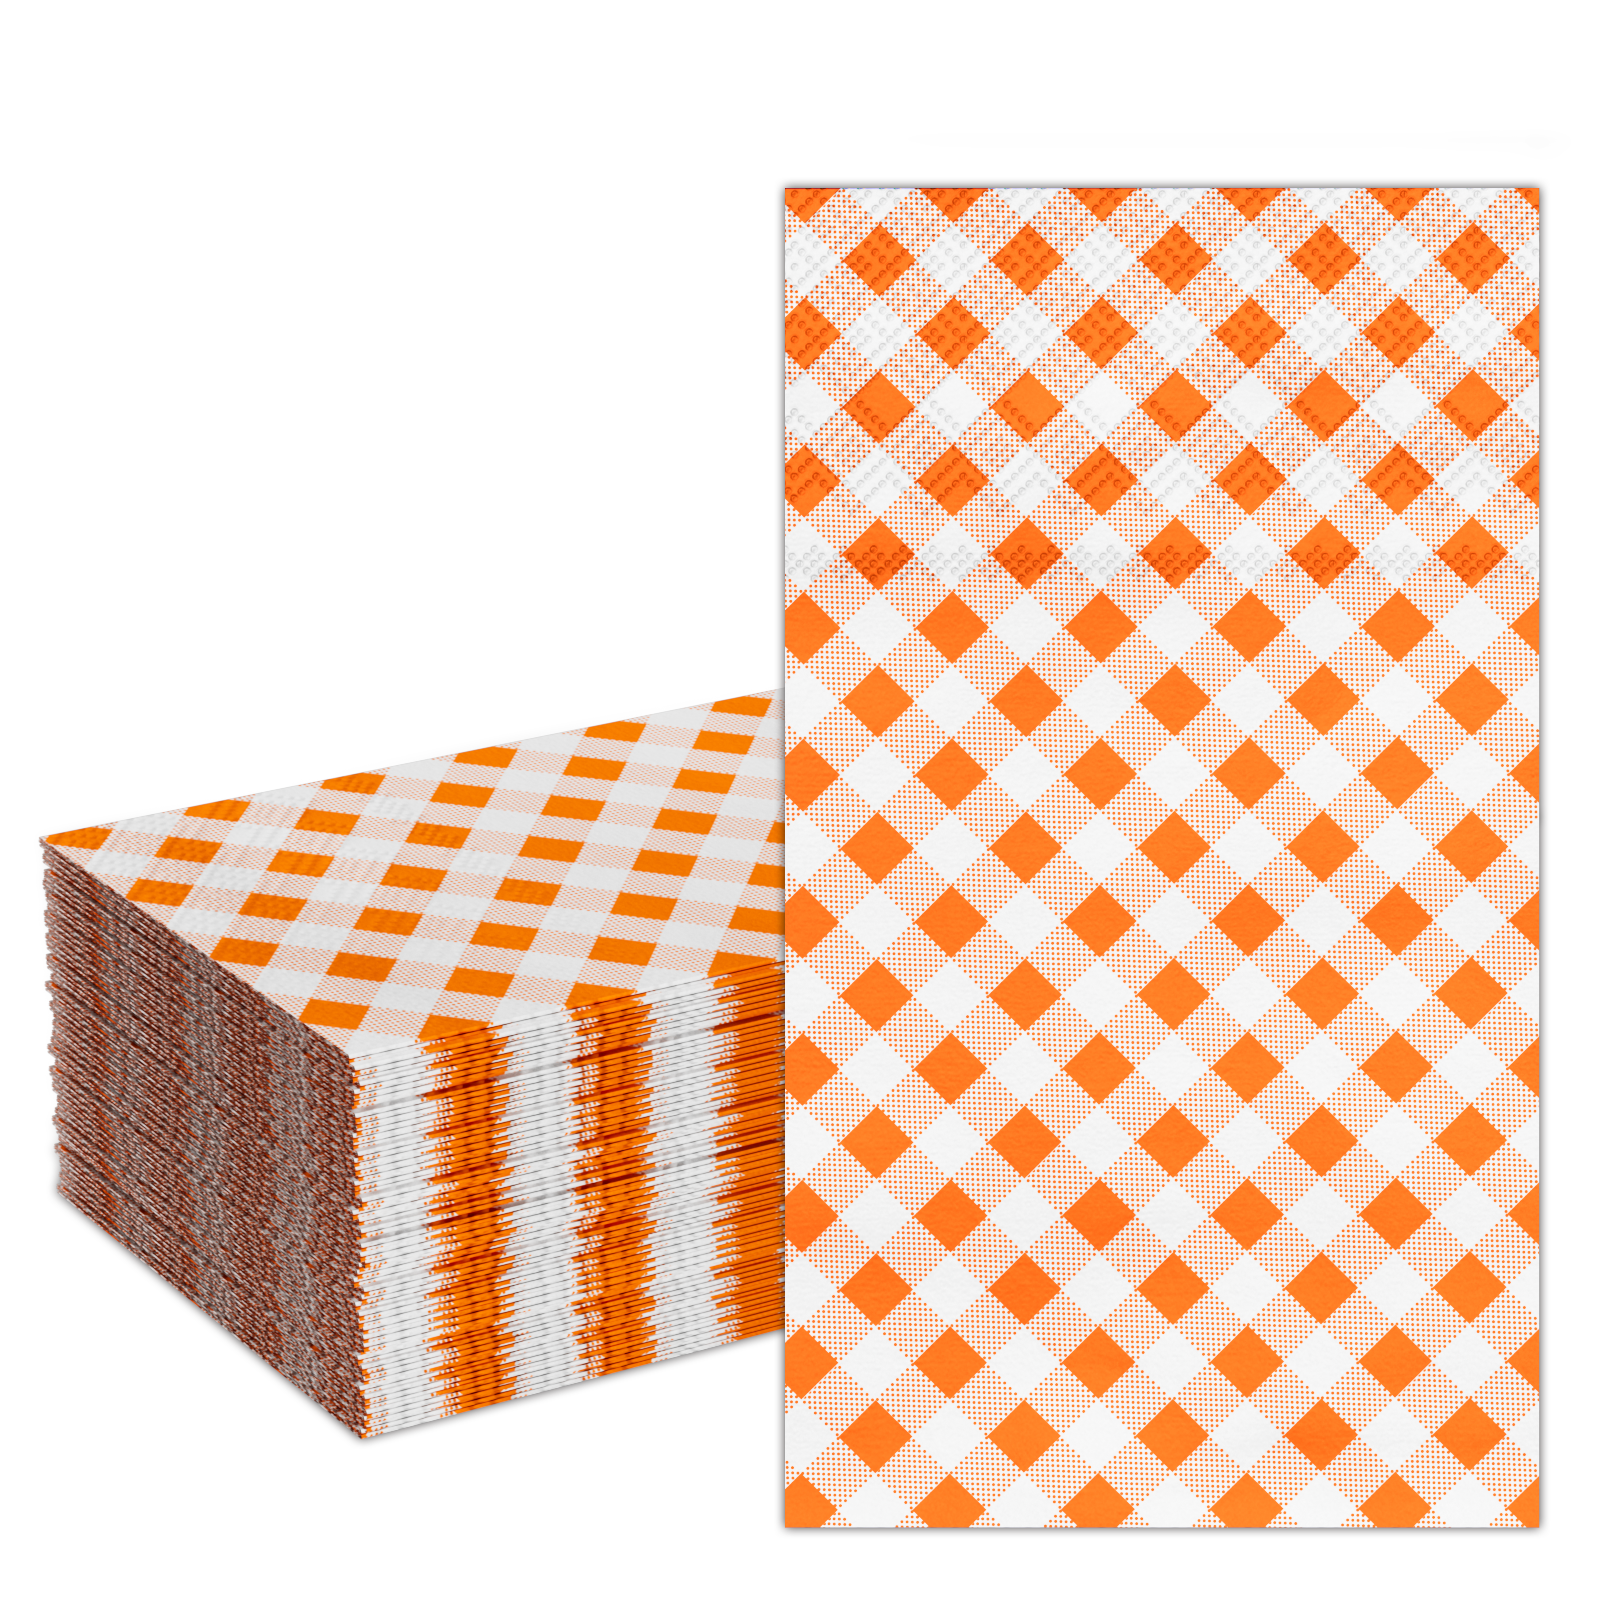 DYLIVeS 50 Count Orange Buffalo plaid Napkins Disposable Towels Orange and White Checkered Guest Napkins 3 Ply Dinner Napkins Gingham Paper Napkins - image 1 of 7